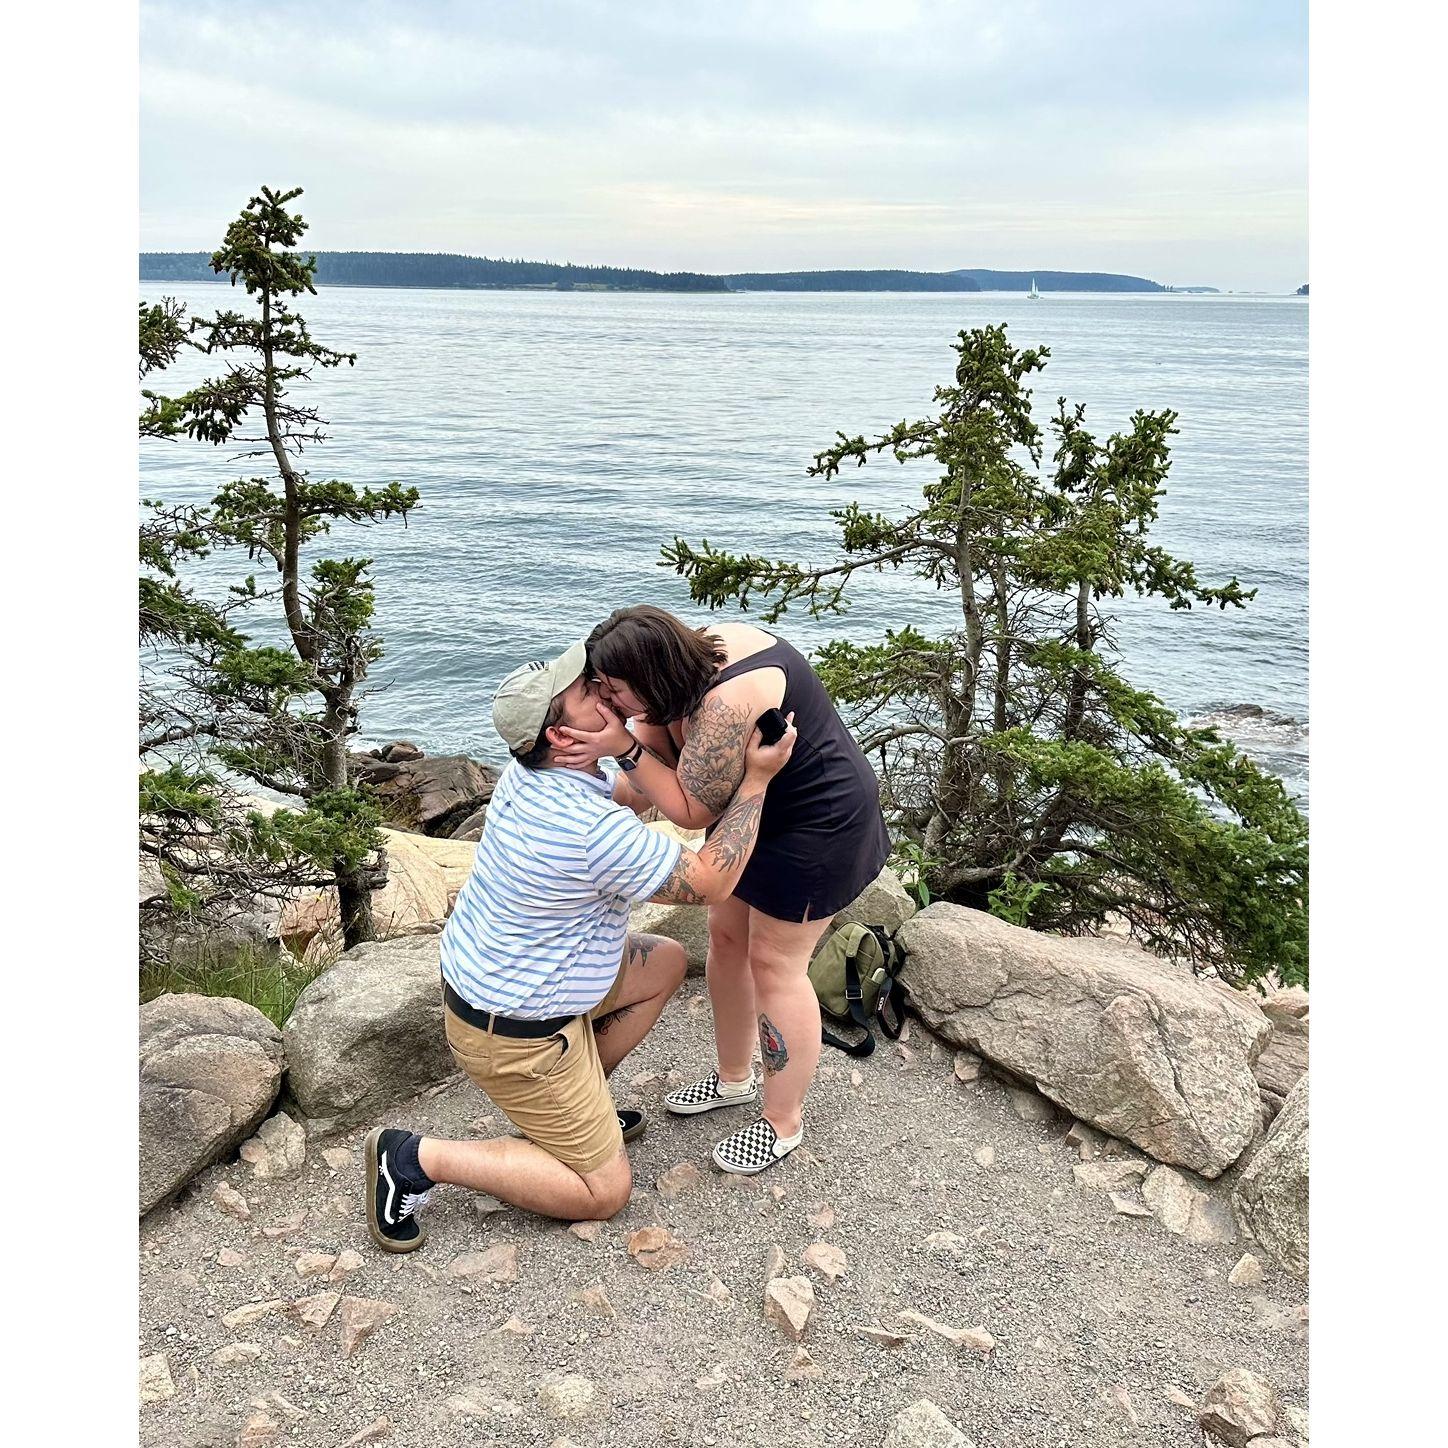 Engaged at Bass Harbor Headlight on 08.07.23, where we ran into some fellow lighthouse seekers who captured this moment for us, to our surprise on National Lighthouse Day!